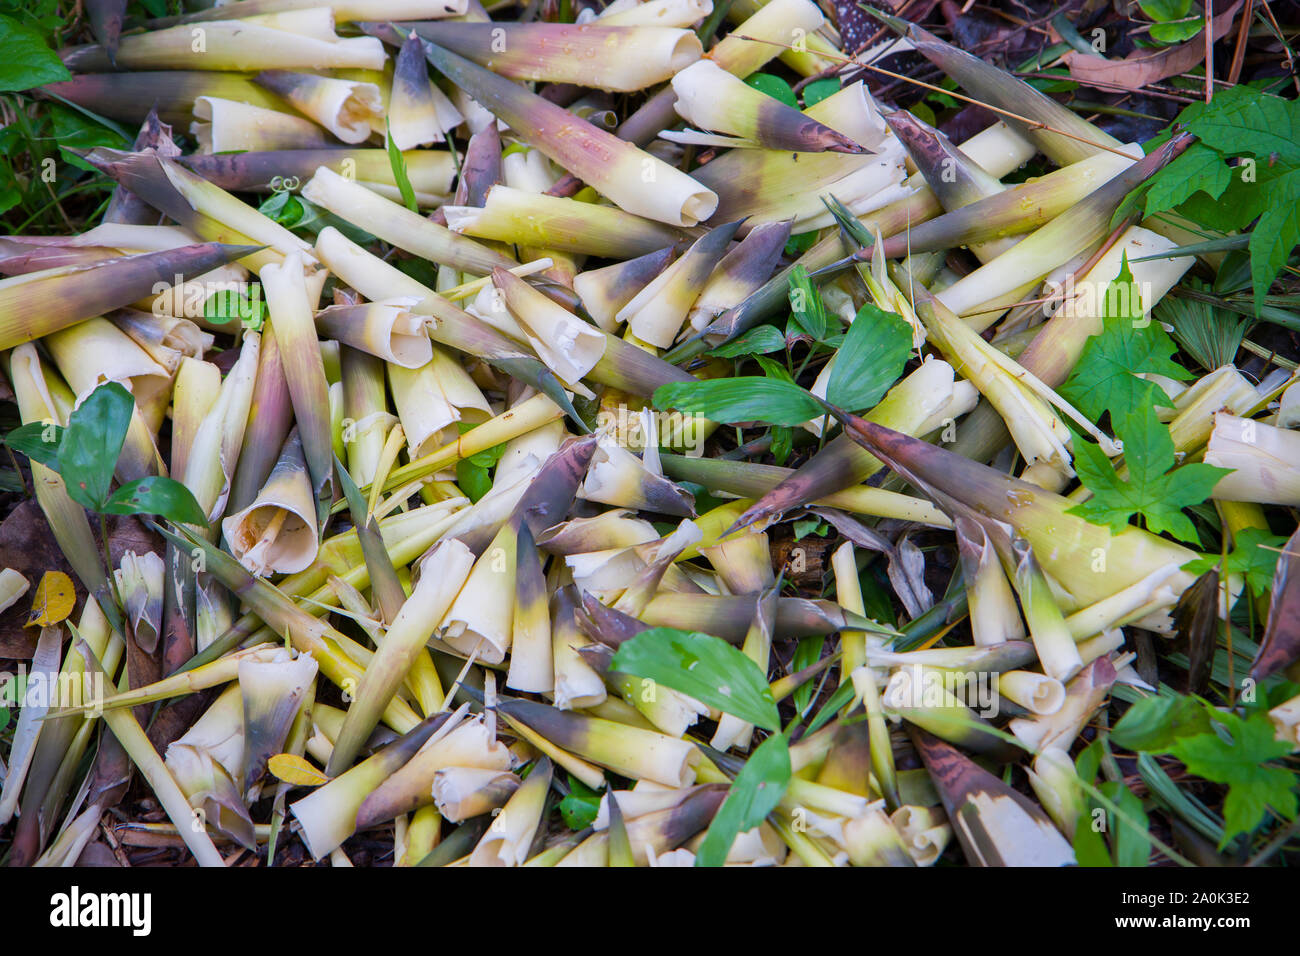 Shell of bamboo shoots Composting fall leaves, Biomass and mulch, organic material. High resolution image gallery. Stock Photo